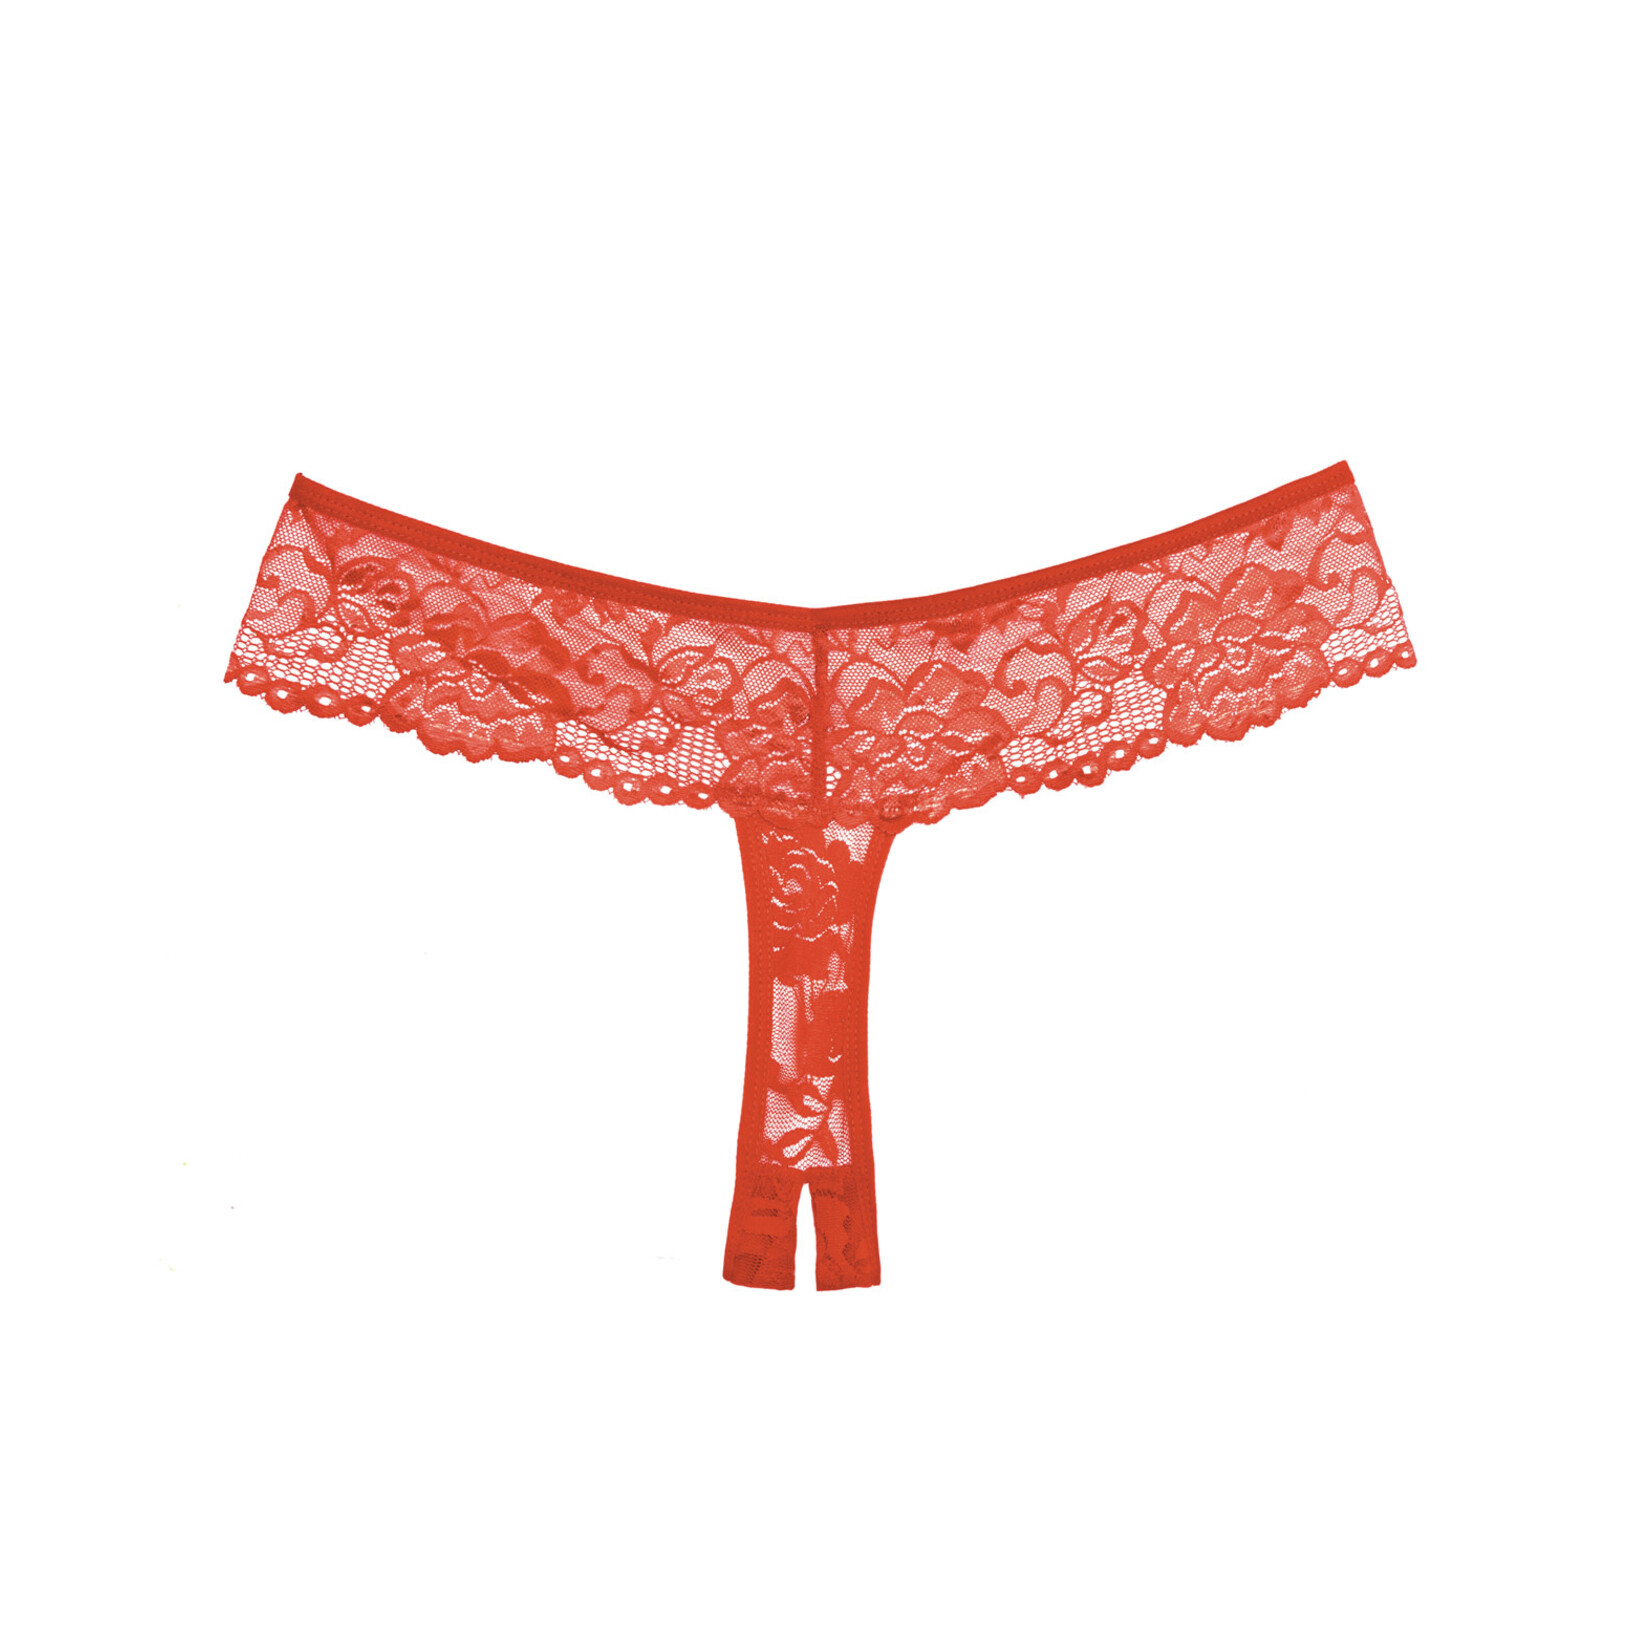 ALLURE LINGERIE ALLURE ADORE - CHIQUI LOVE PANTY - RED - ONE SIZE